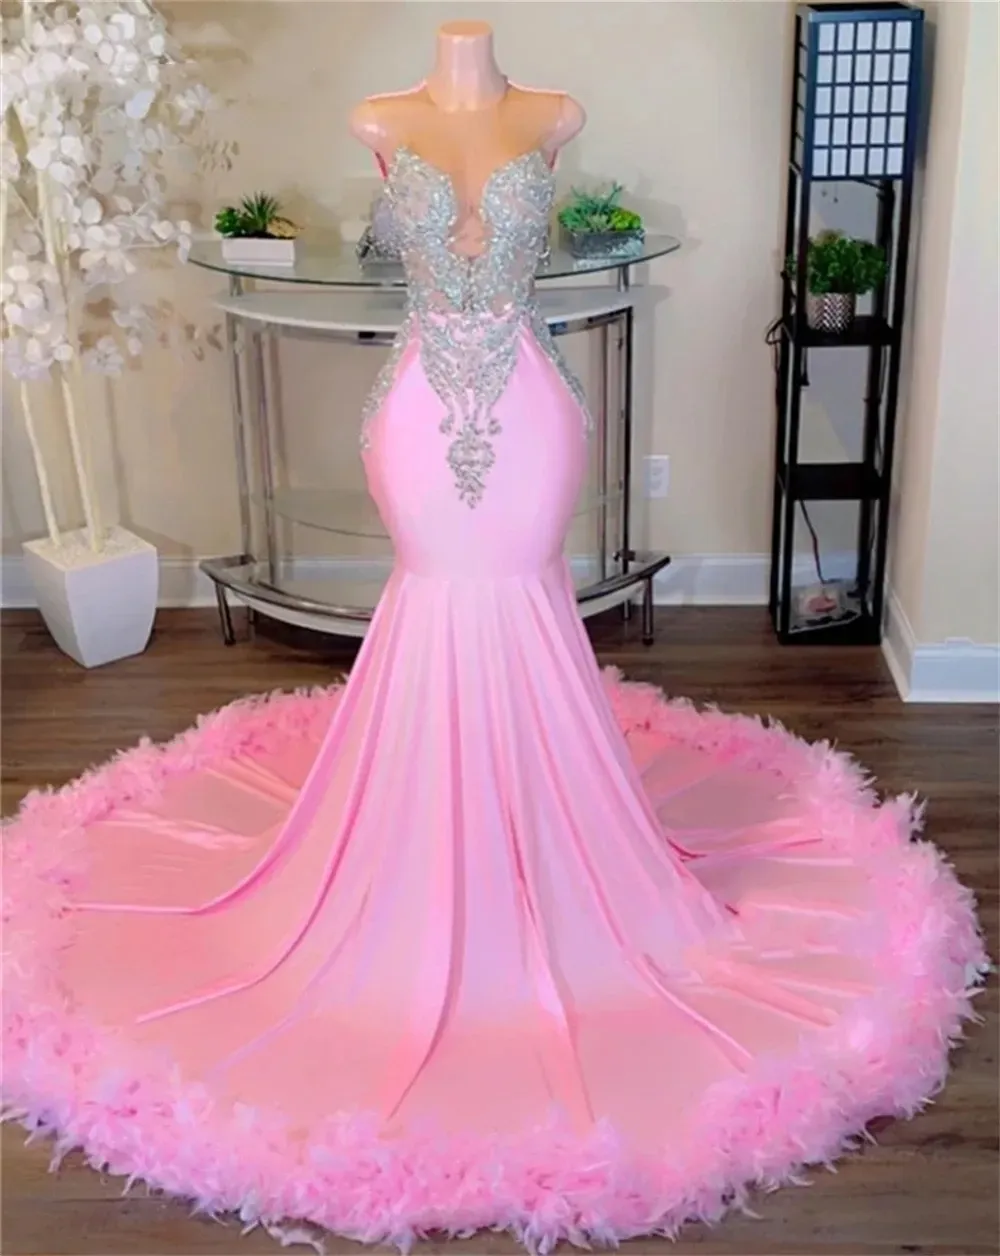 New Sweety Pink Feathers Mermaid Prom Dresses For Black Girls Sliver Crystal Beaded Tail Gowns Sexy Sparkly Robe De Bal